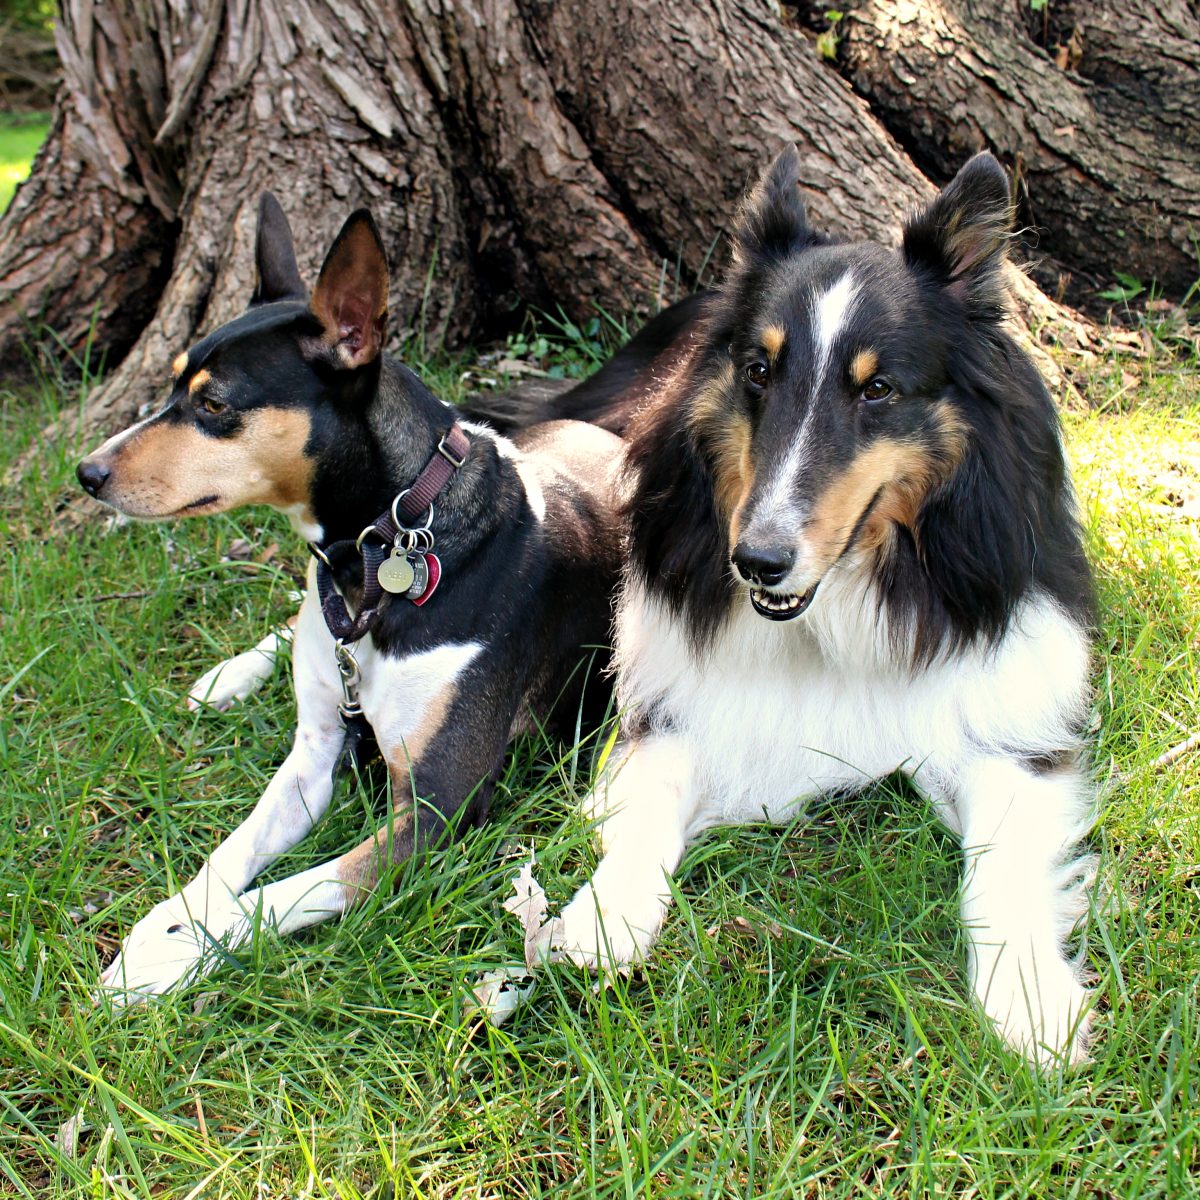 Tabby the Rat Terrier and Pax the Sheltie lying down on grass.